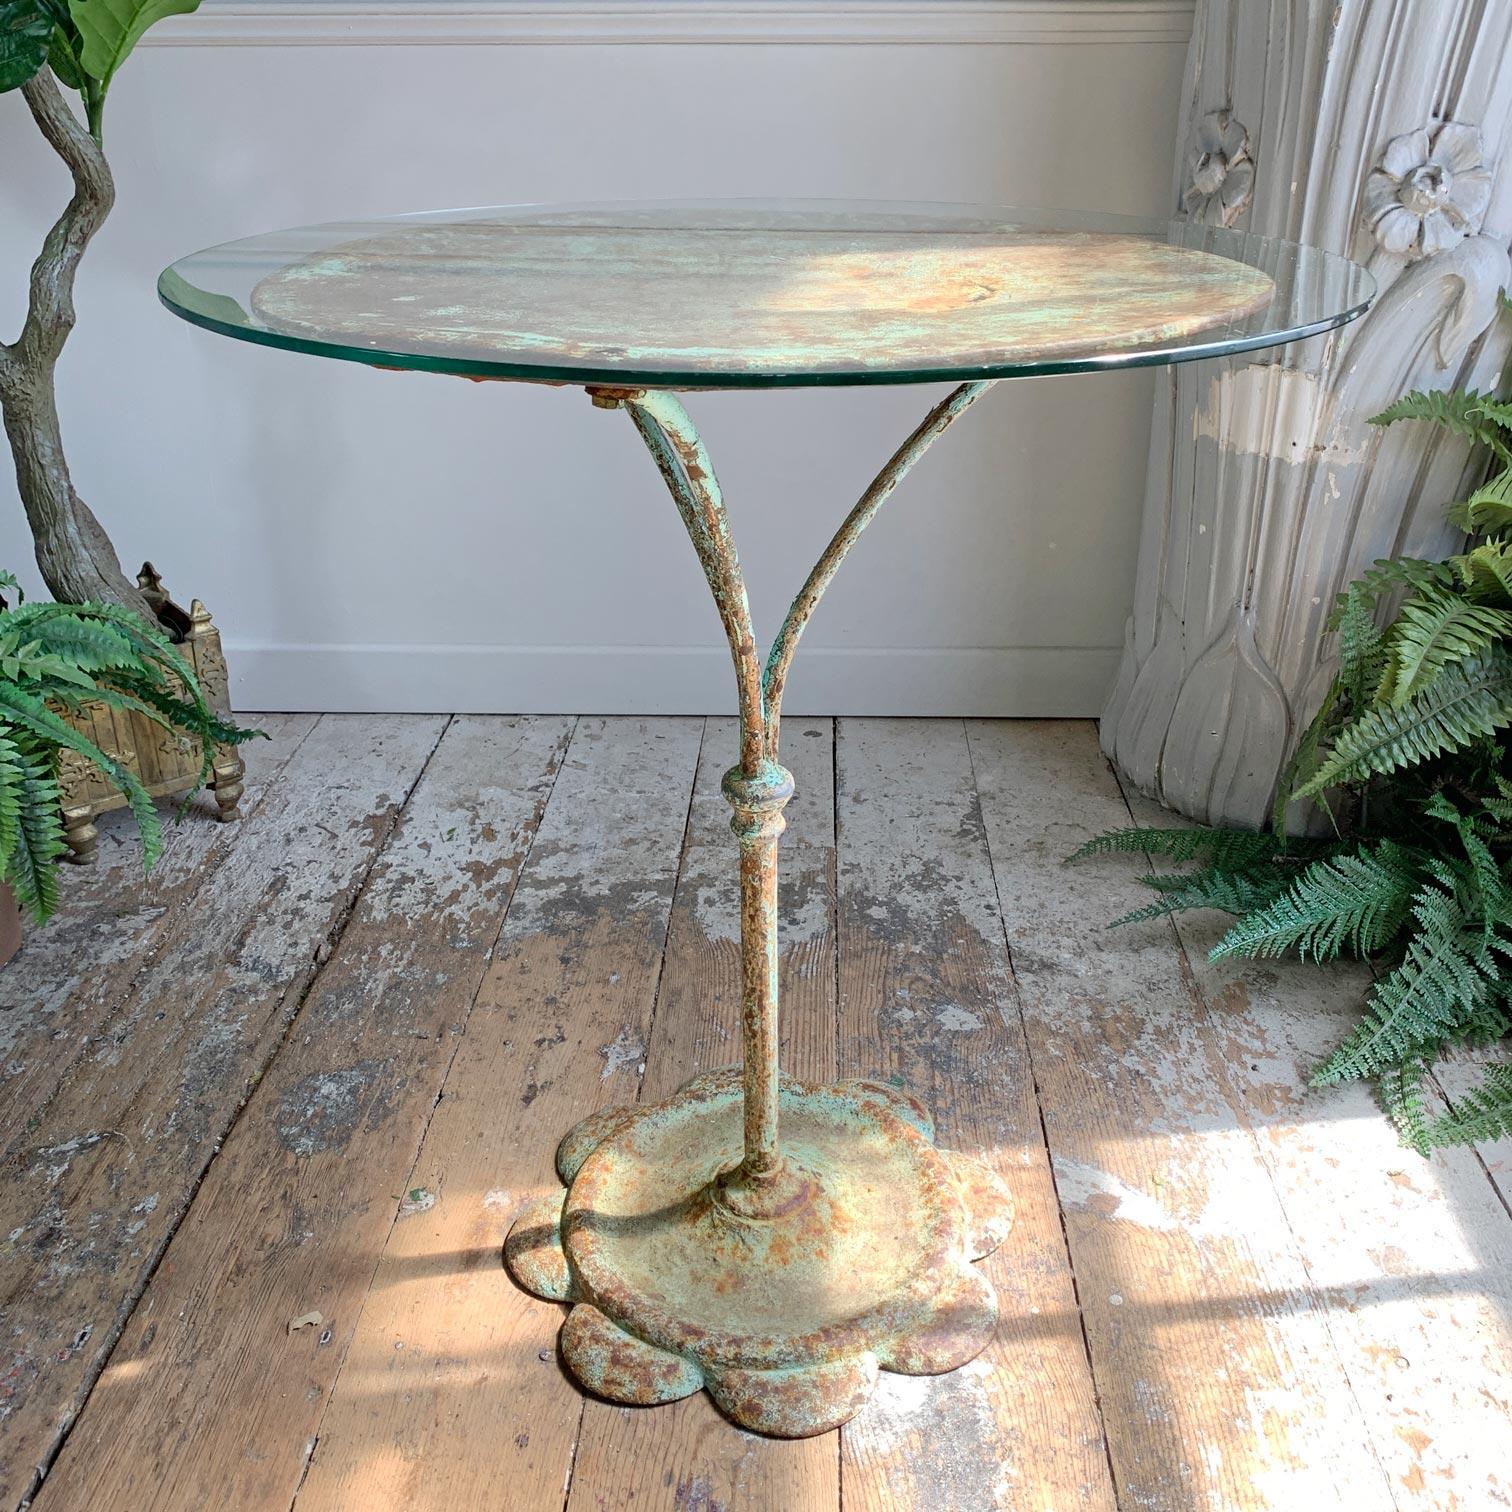 Gorgeous early 20th century French iron bistro/café table in a stunning turquoise paint, with an aged patina. The top has a few small areas where time and use has worn through, but is still solid and is supplied with a vintage glass top, which